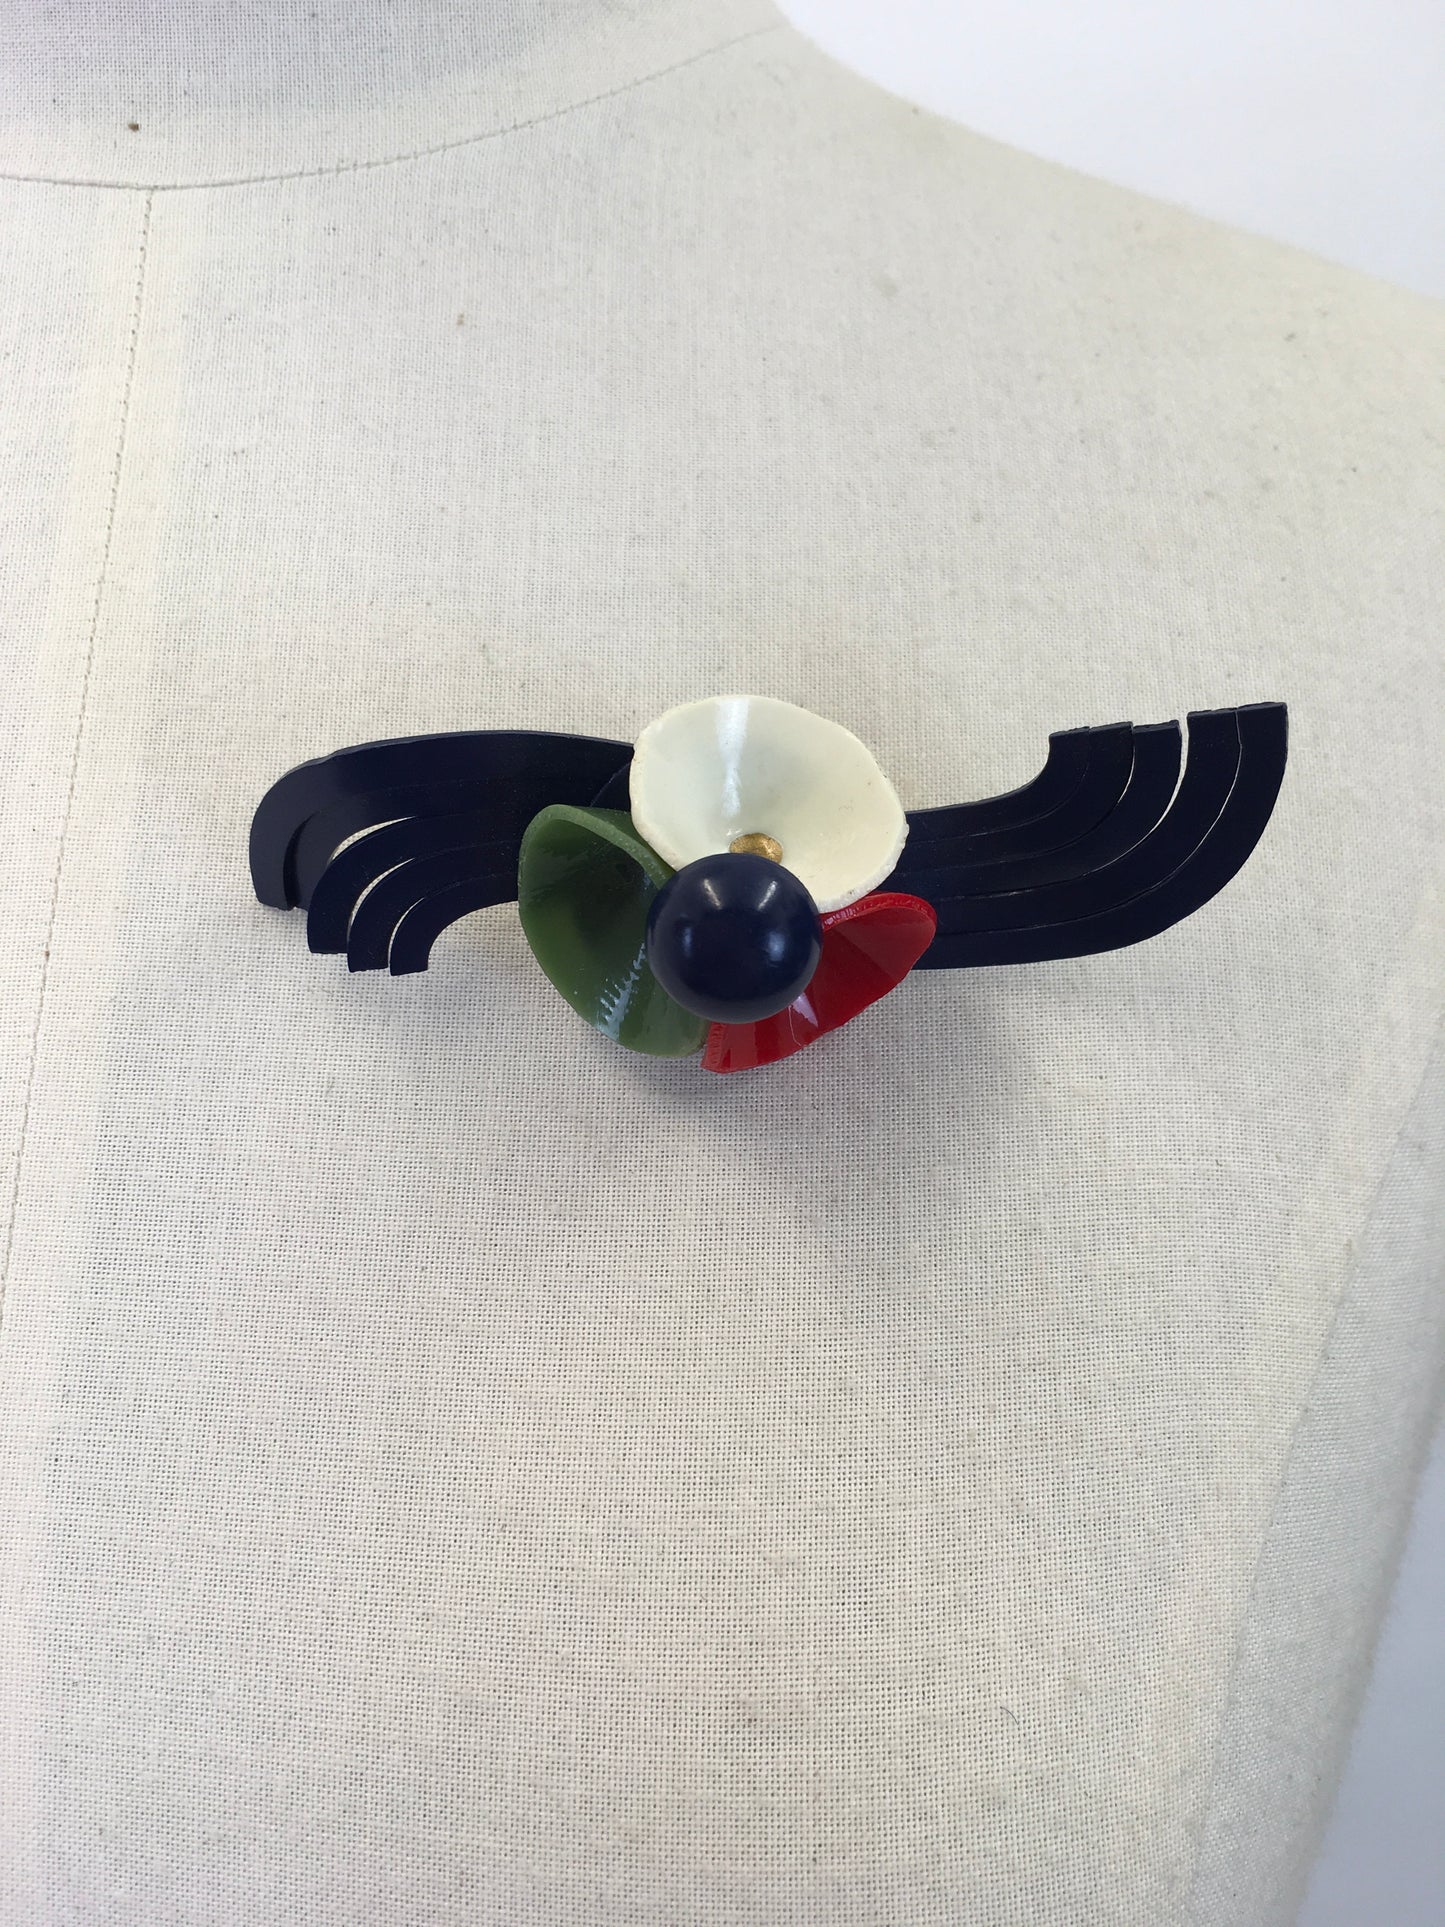 Original Late 1930's Early 1940's Celluloid Brooch - In Blue, Red, White & Green